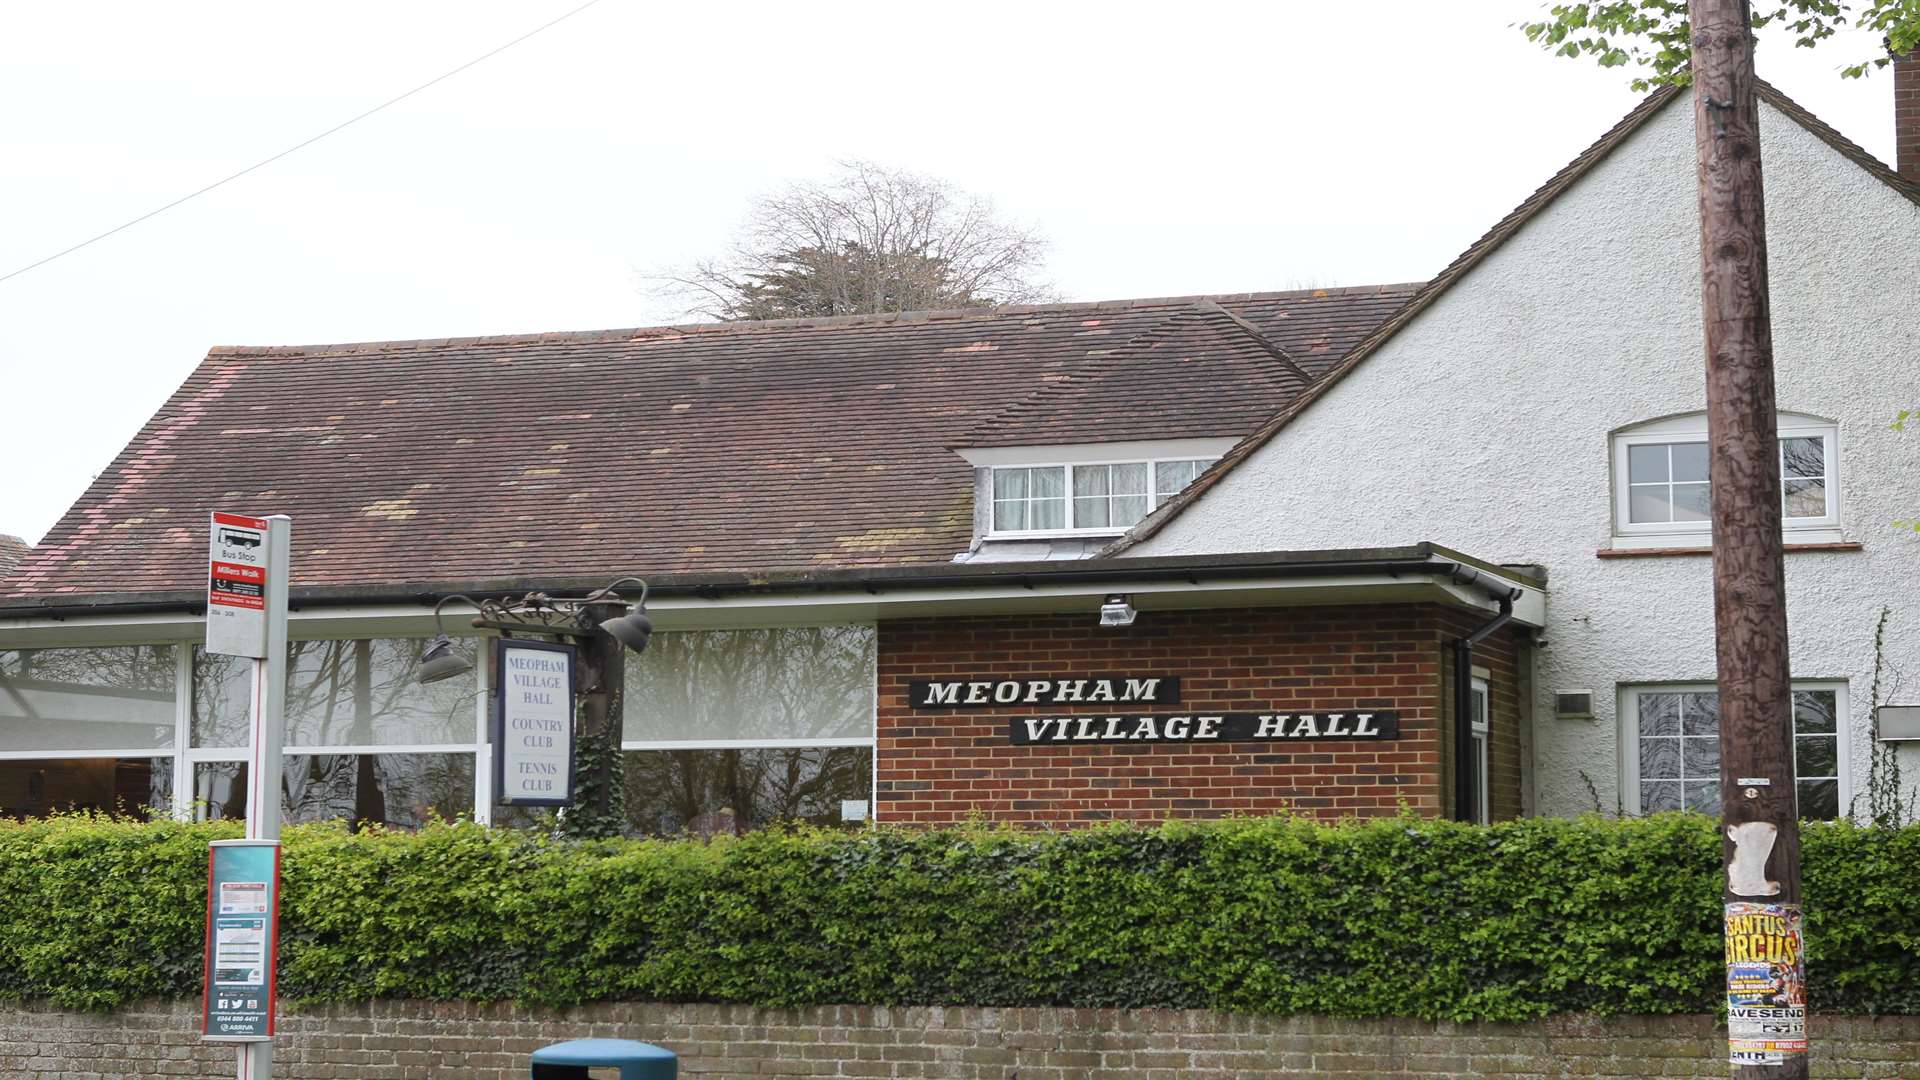 Meopham's Village Halls has a deteriorating roof